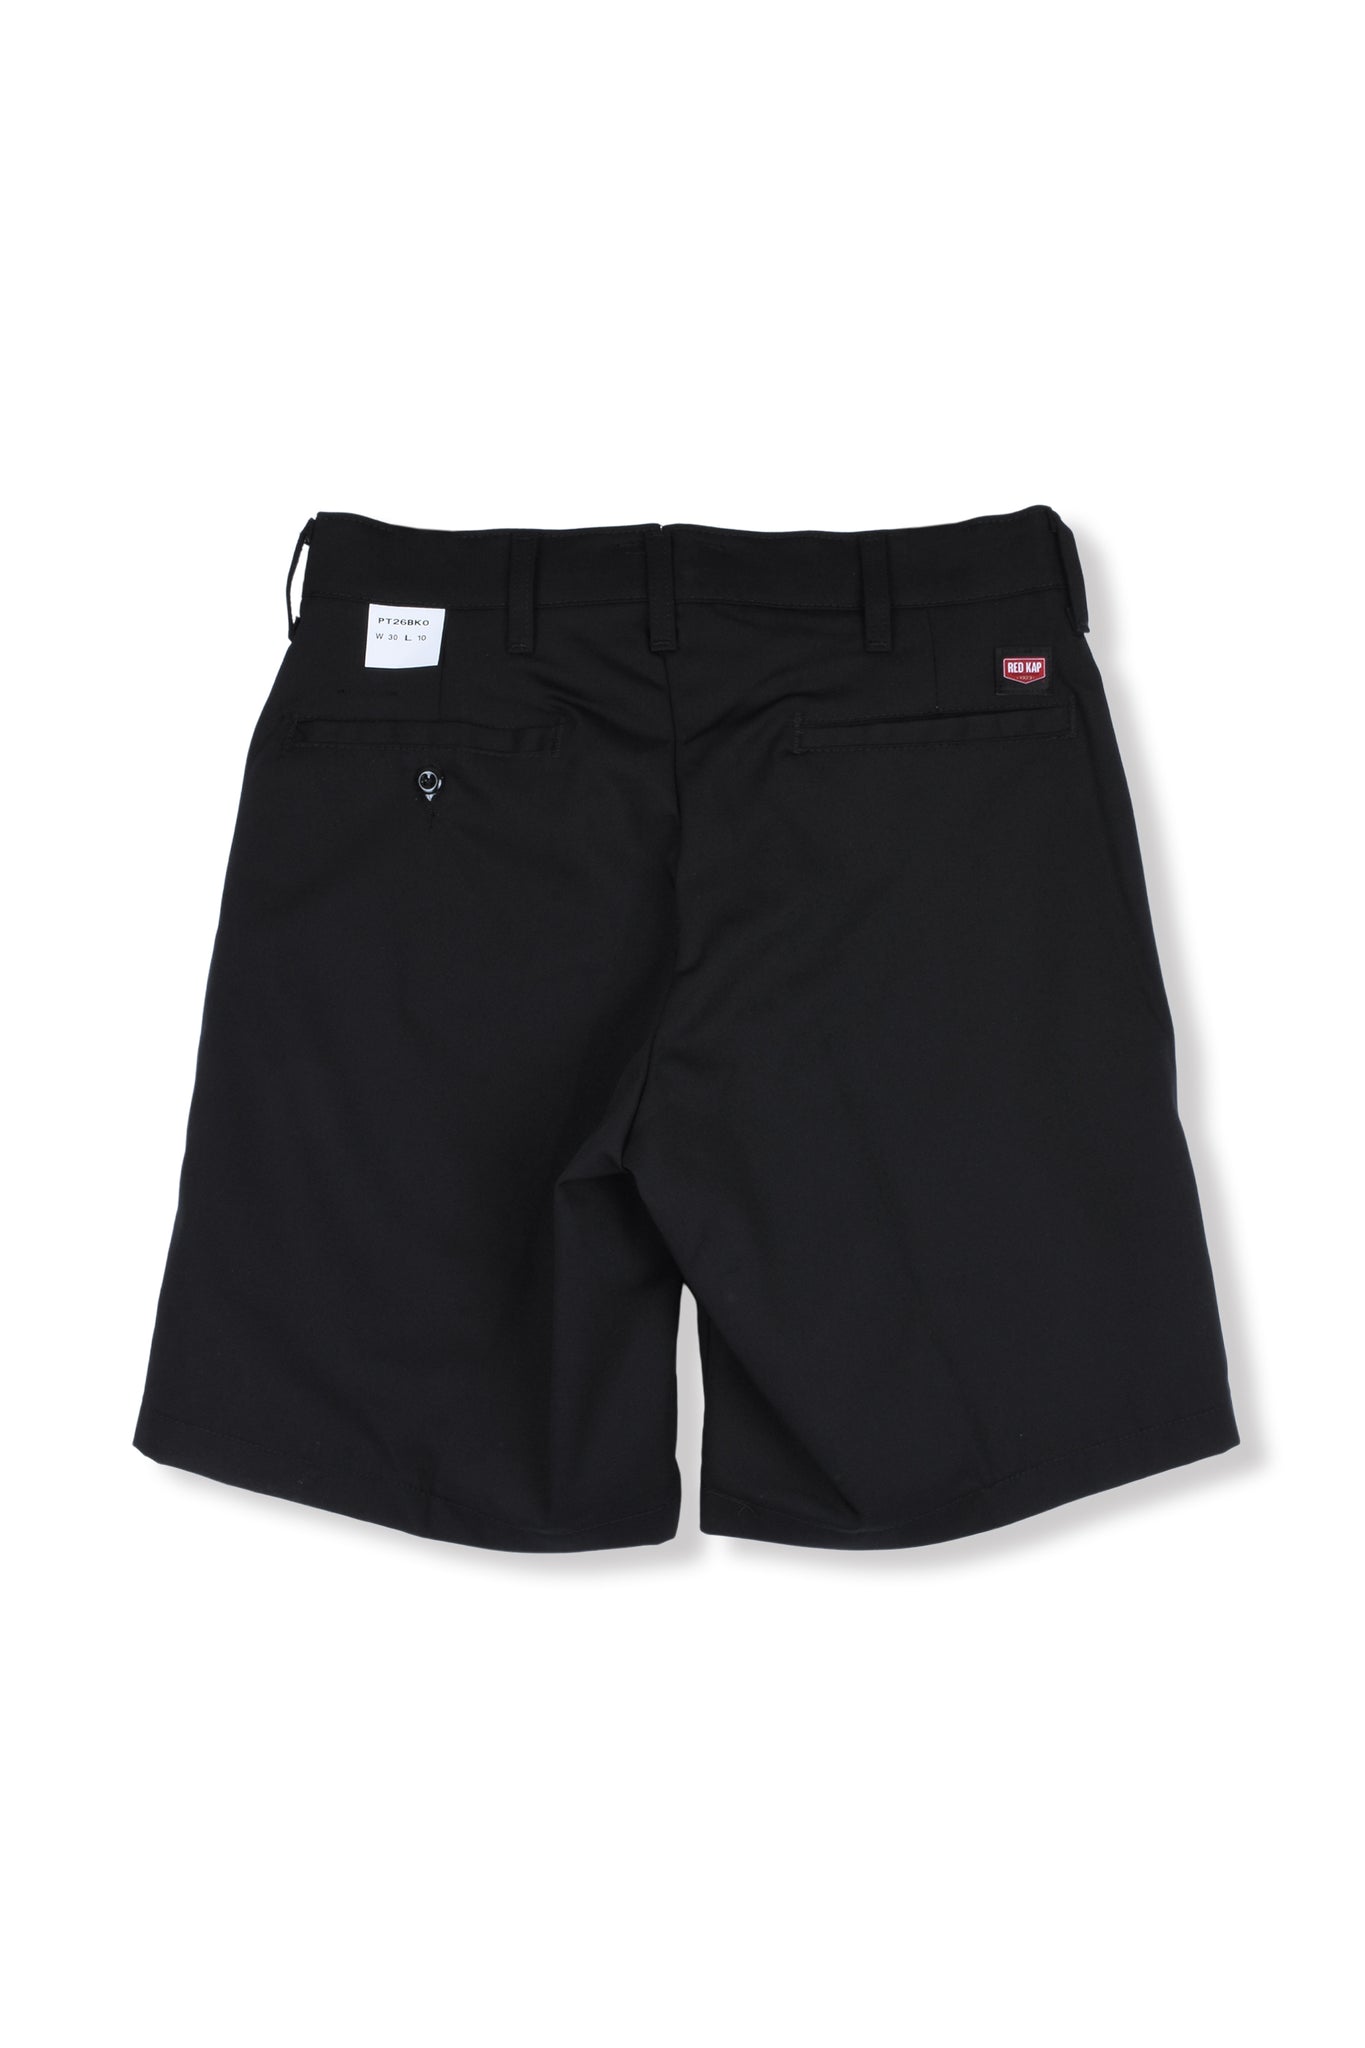 WASBORN EMBROIDERY WORK SHORTS